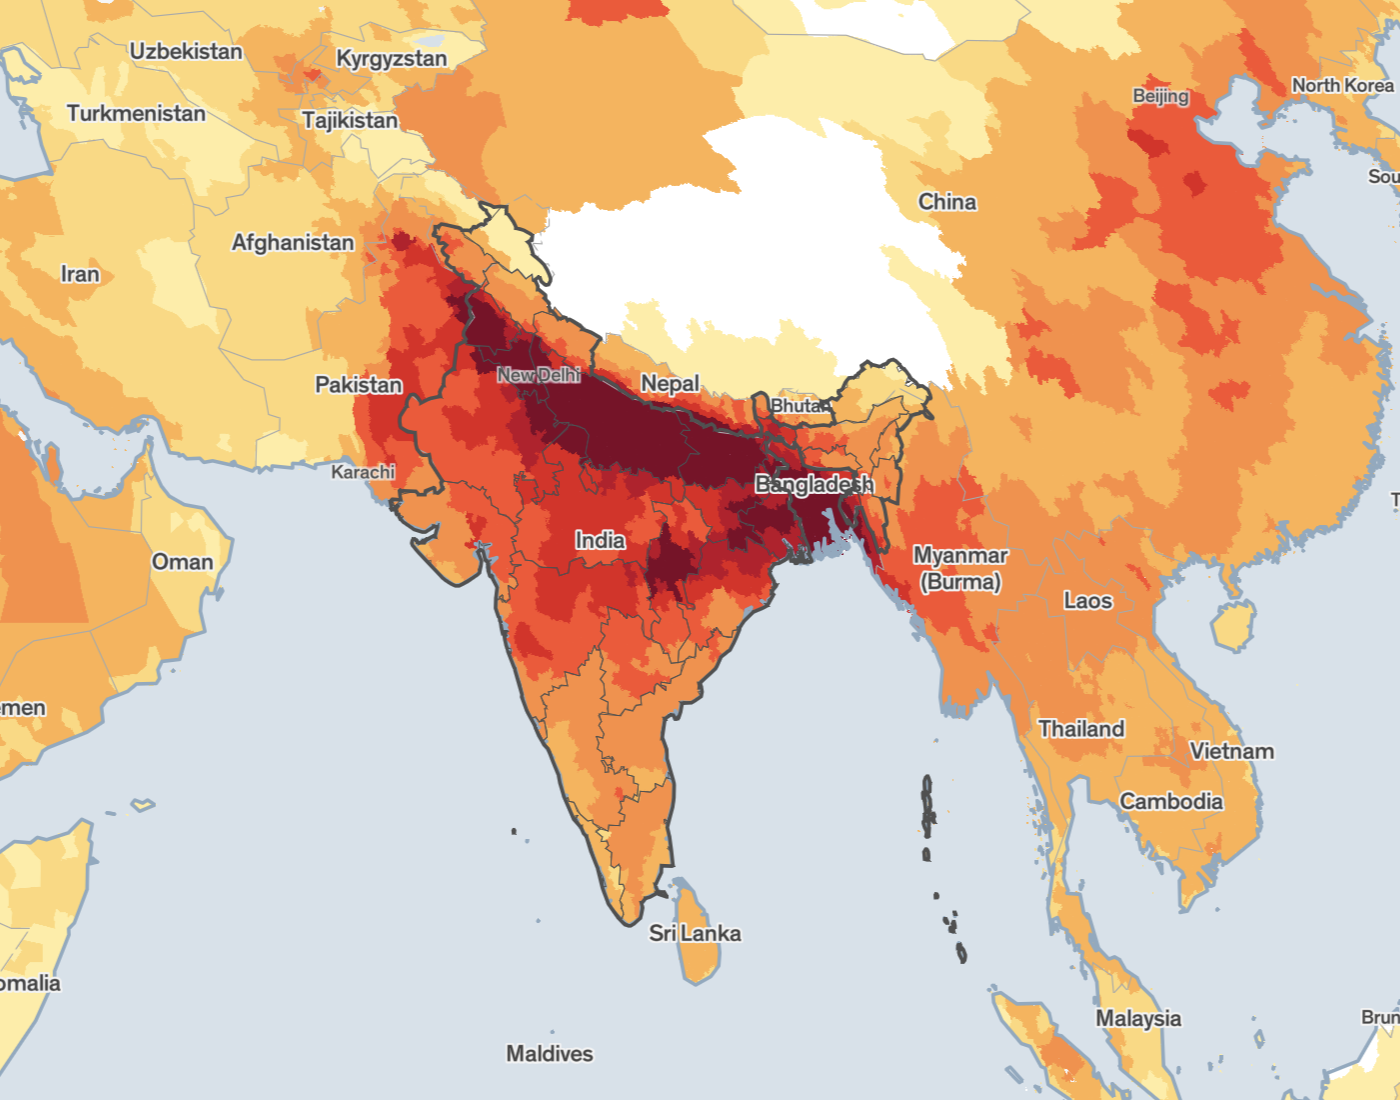 Mapped: The Population of India Compared With Countries